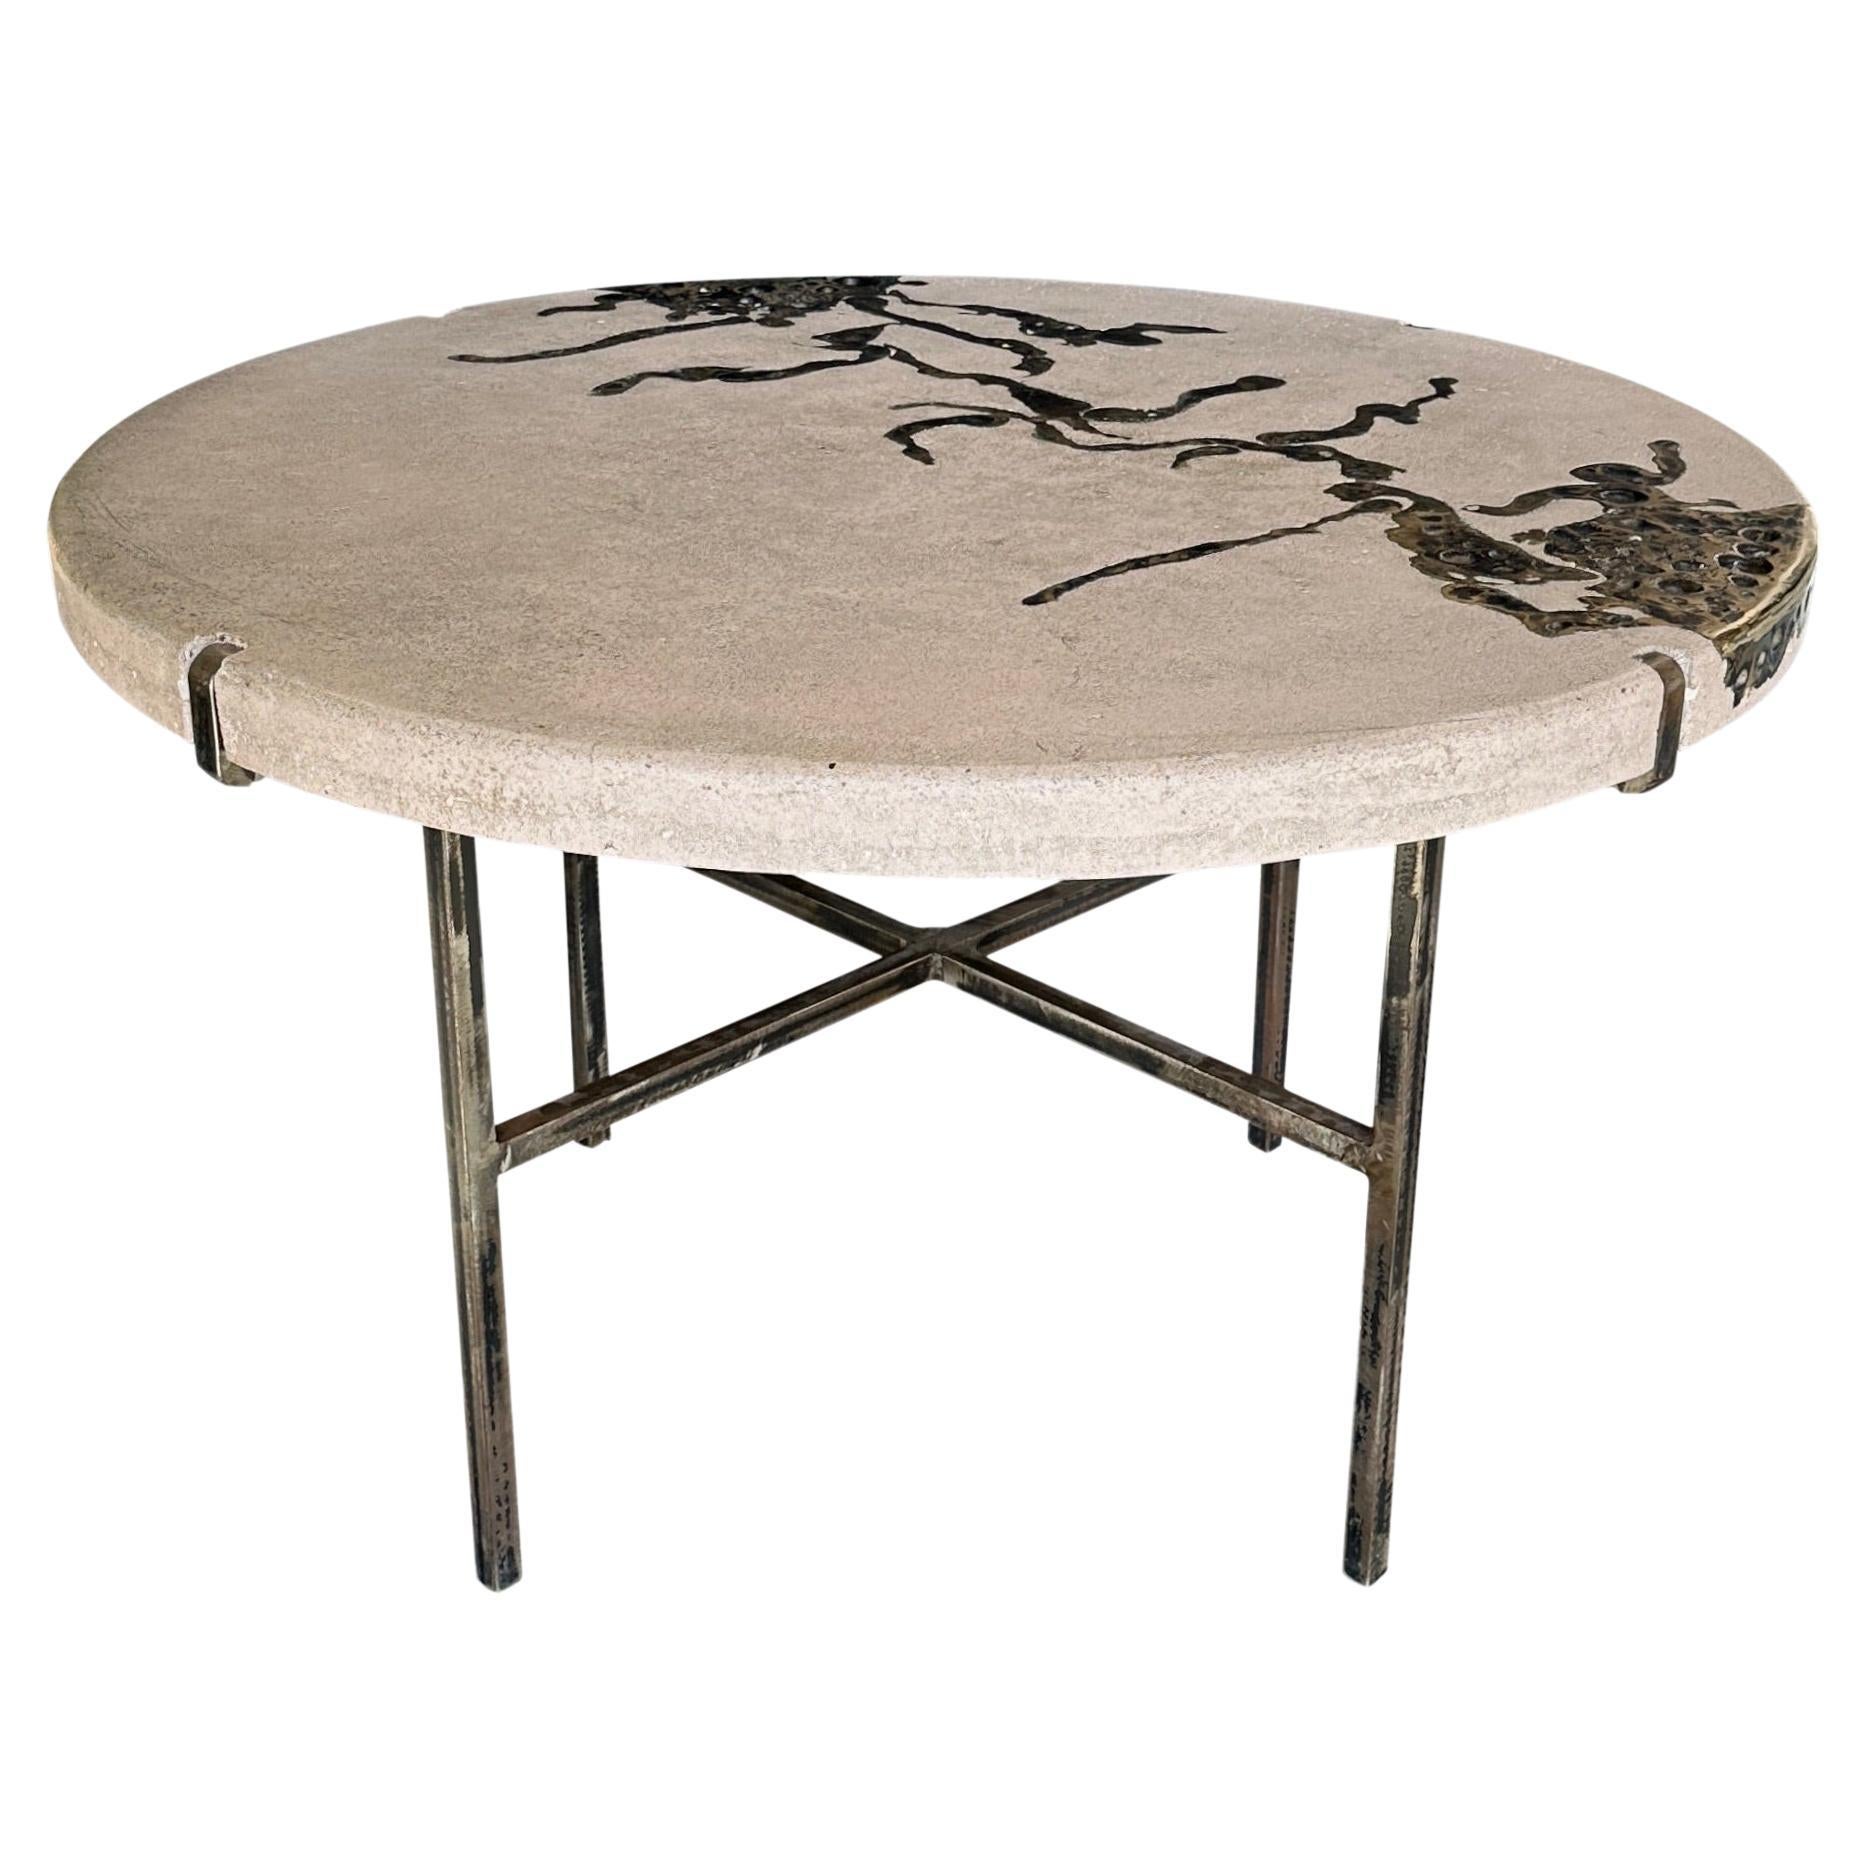 Silas Seandel, “Terra” Dining Table For Sale